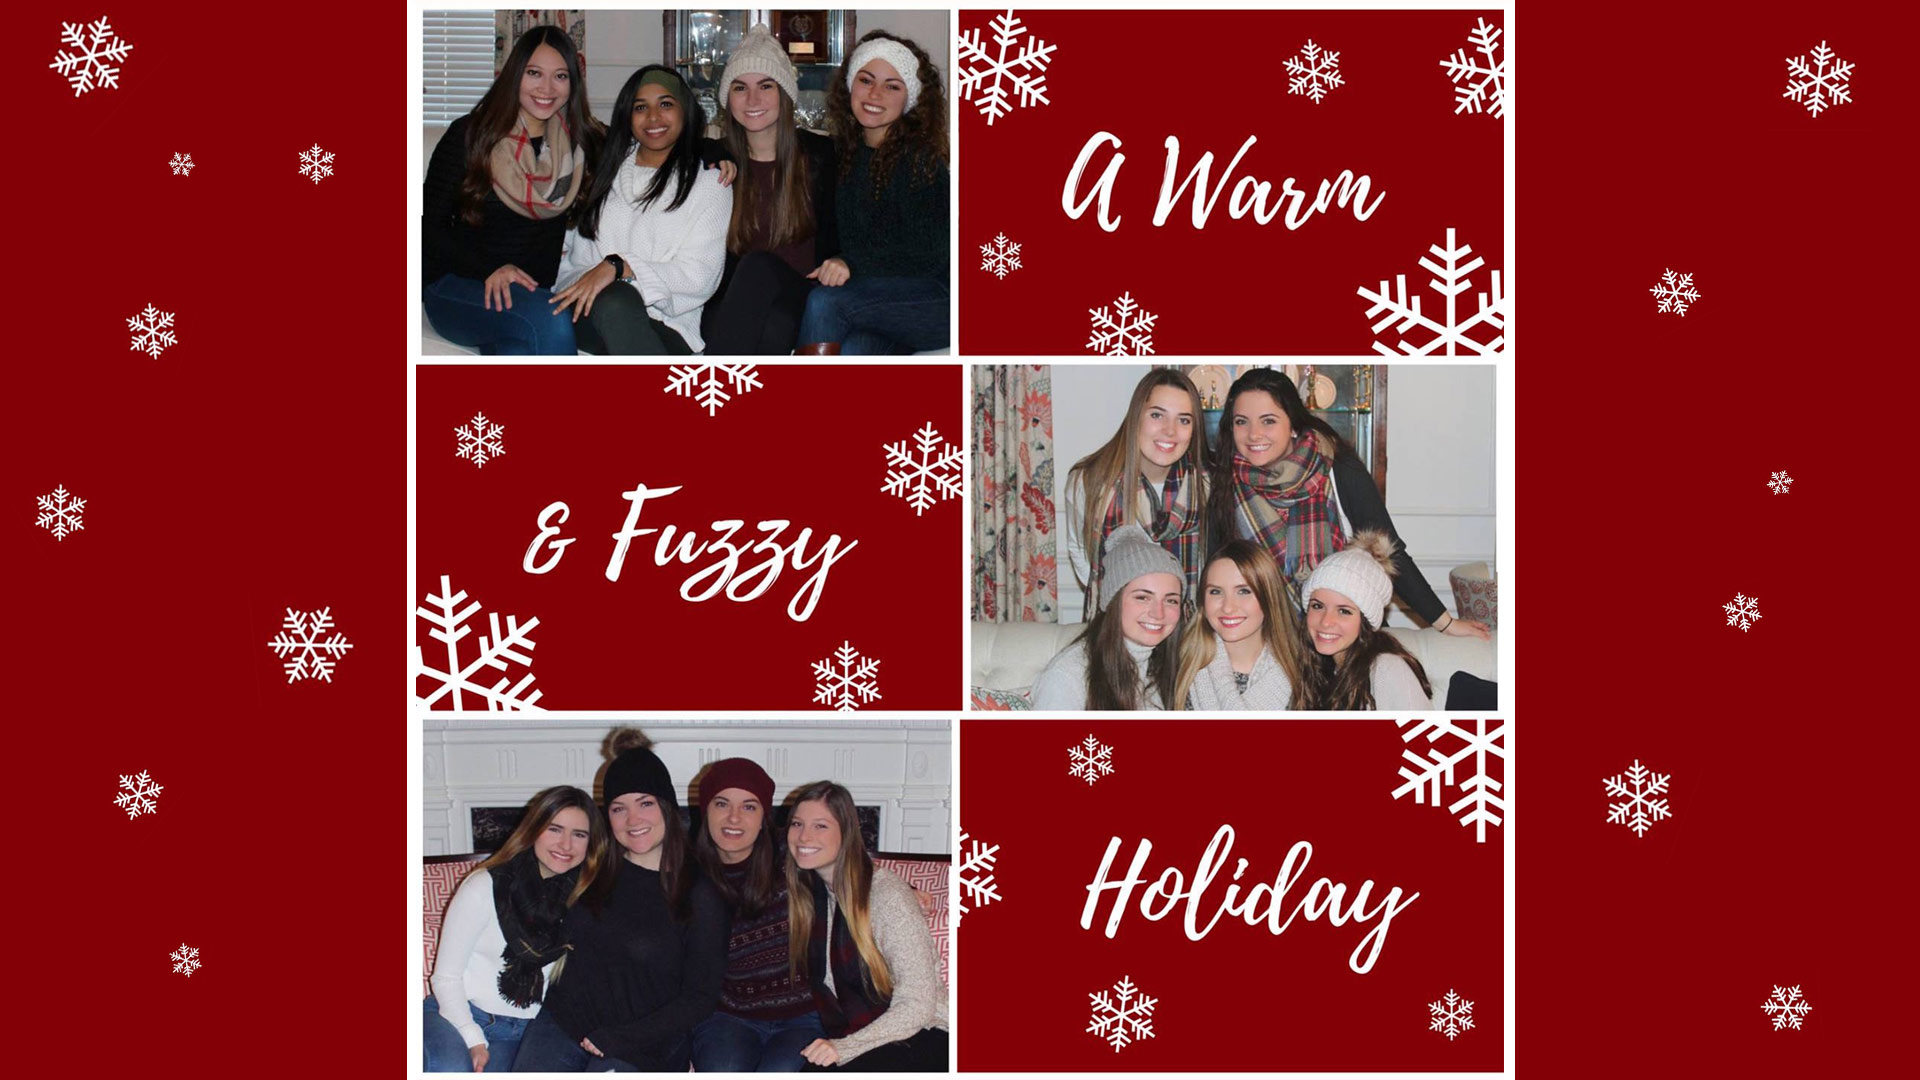 Photo grid with girls in groups of four or five wearing winter clothing